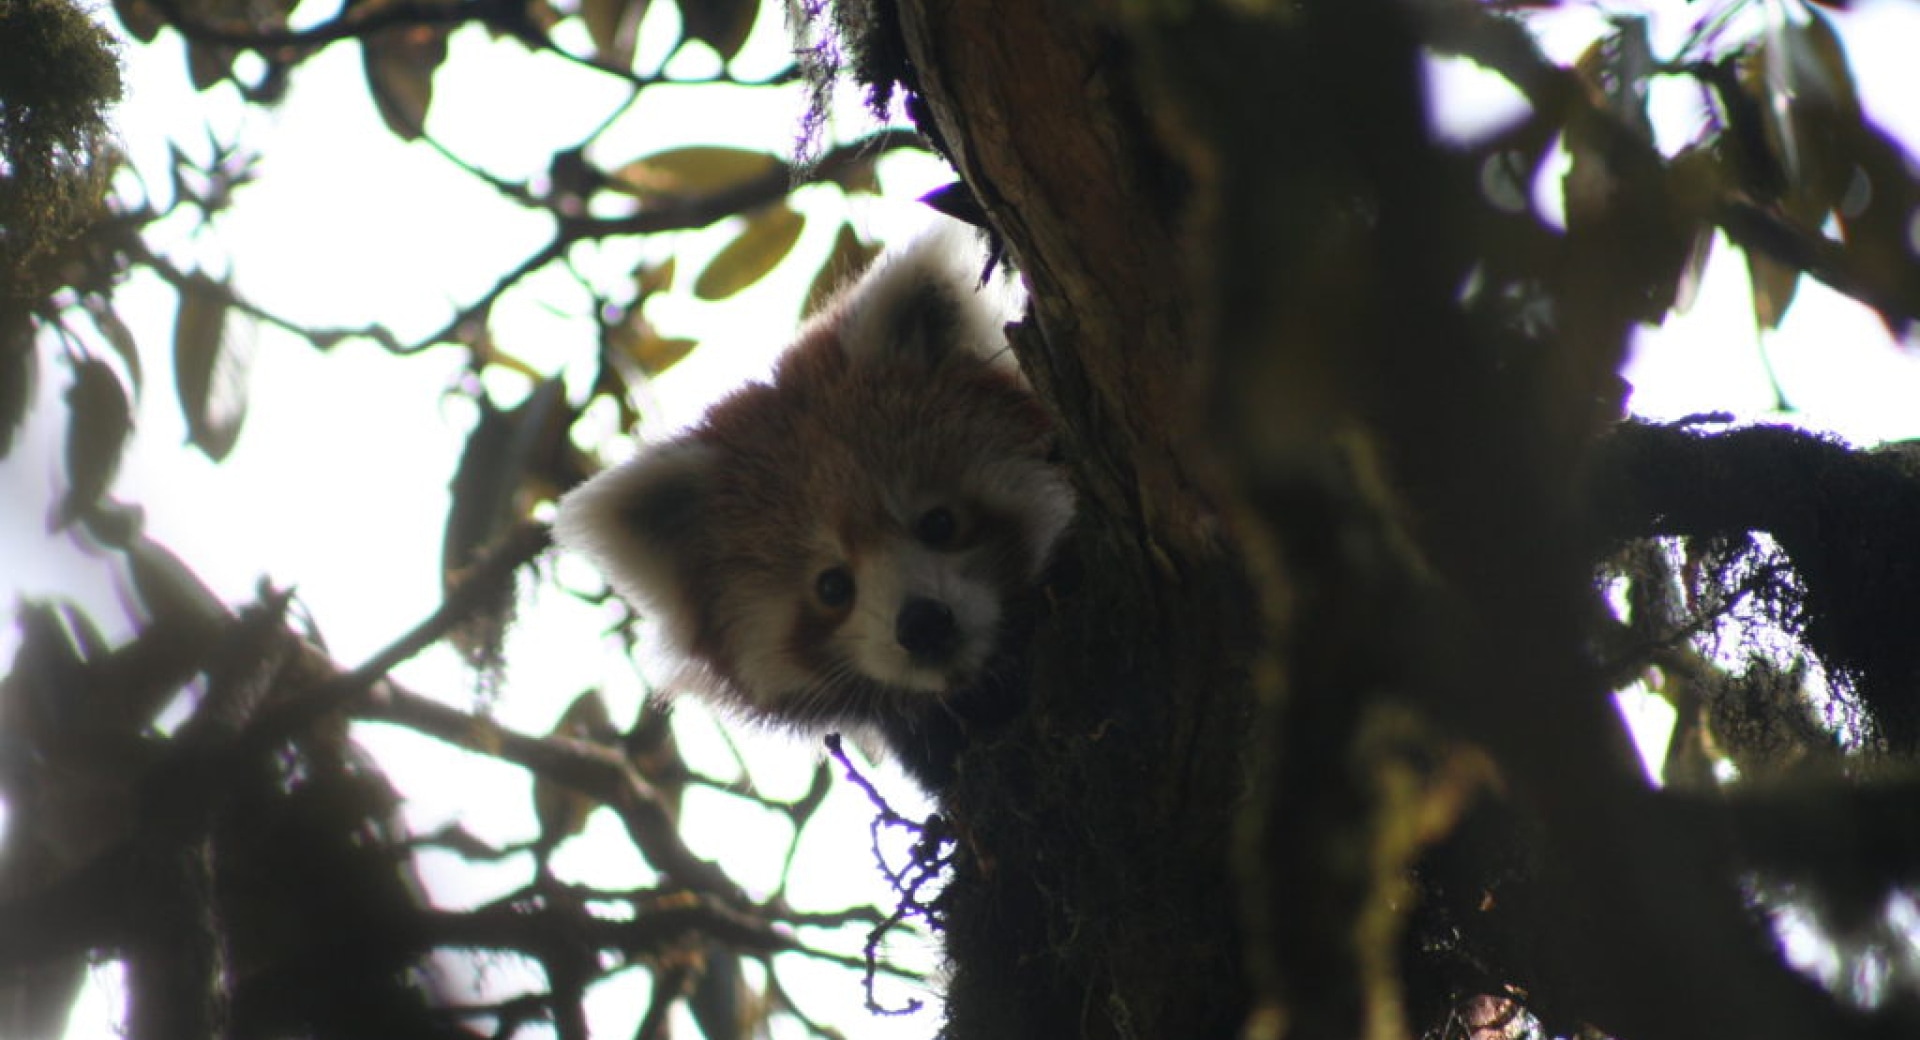 Ten Red Pandas in a Rhododendron Tree